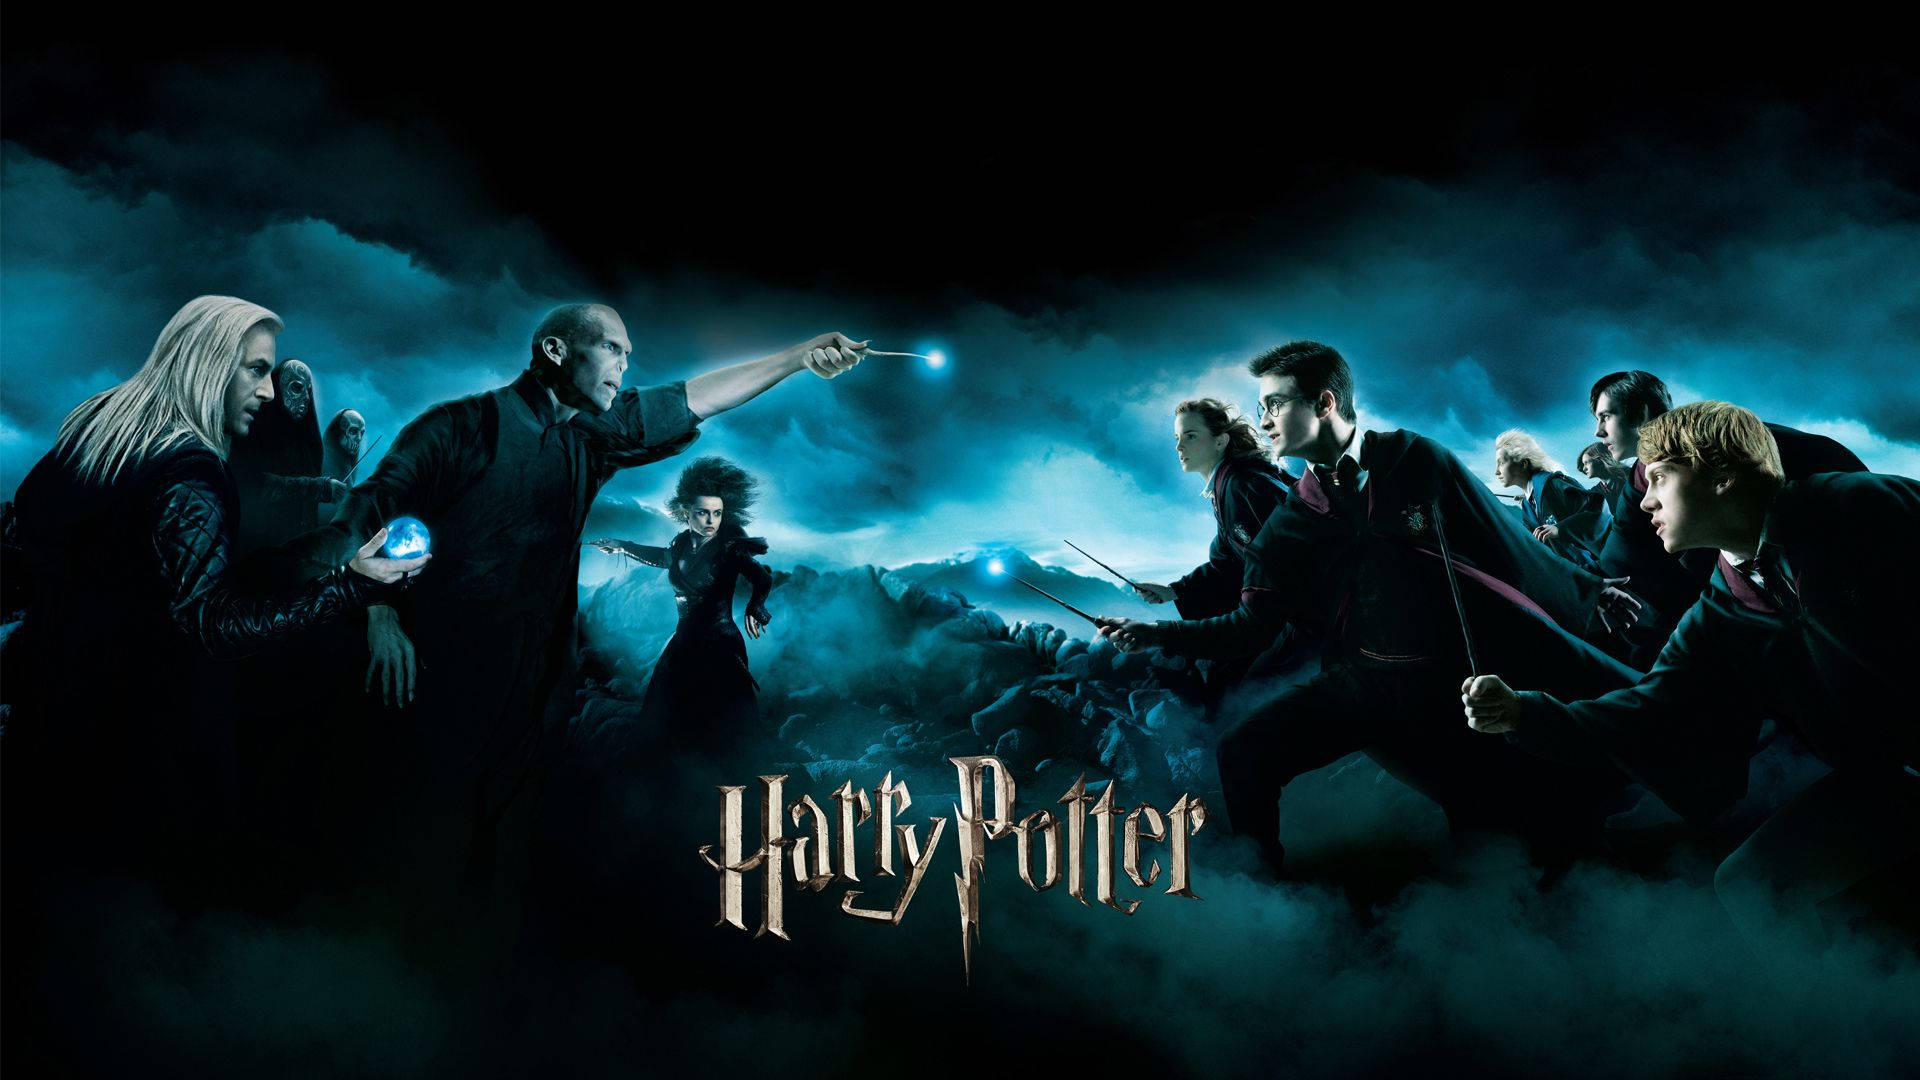 Free download wallpaper hd harry potter hd wallpapers 1080p hd harry potter  7 [1024x768] for your Desktop, Mobile & Tablet | Explore 44+ 1080P Harry  Potter Wallpaper | Harry Potter Wallpaper, Harry